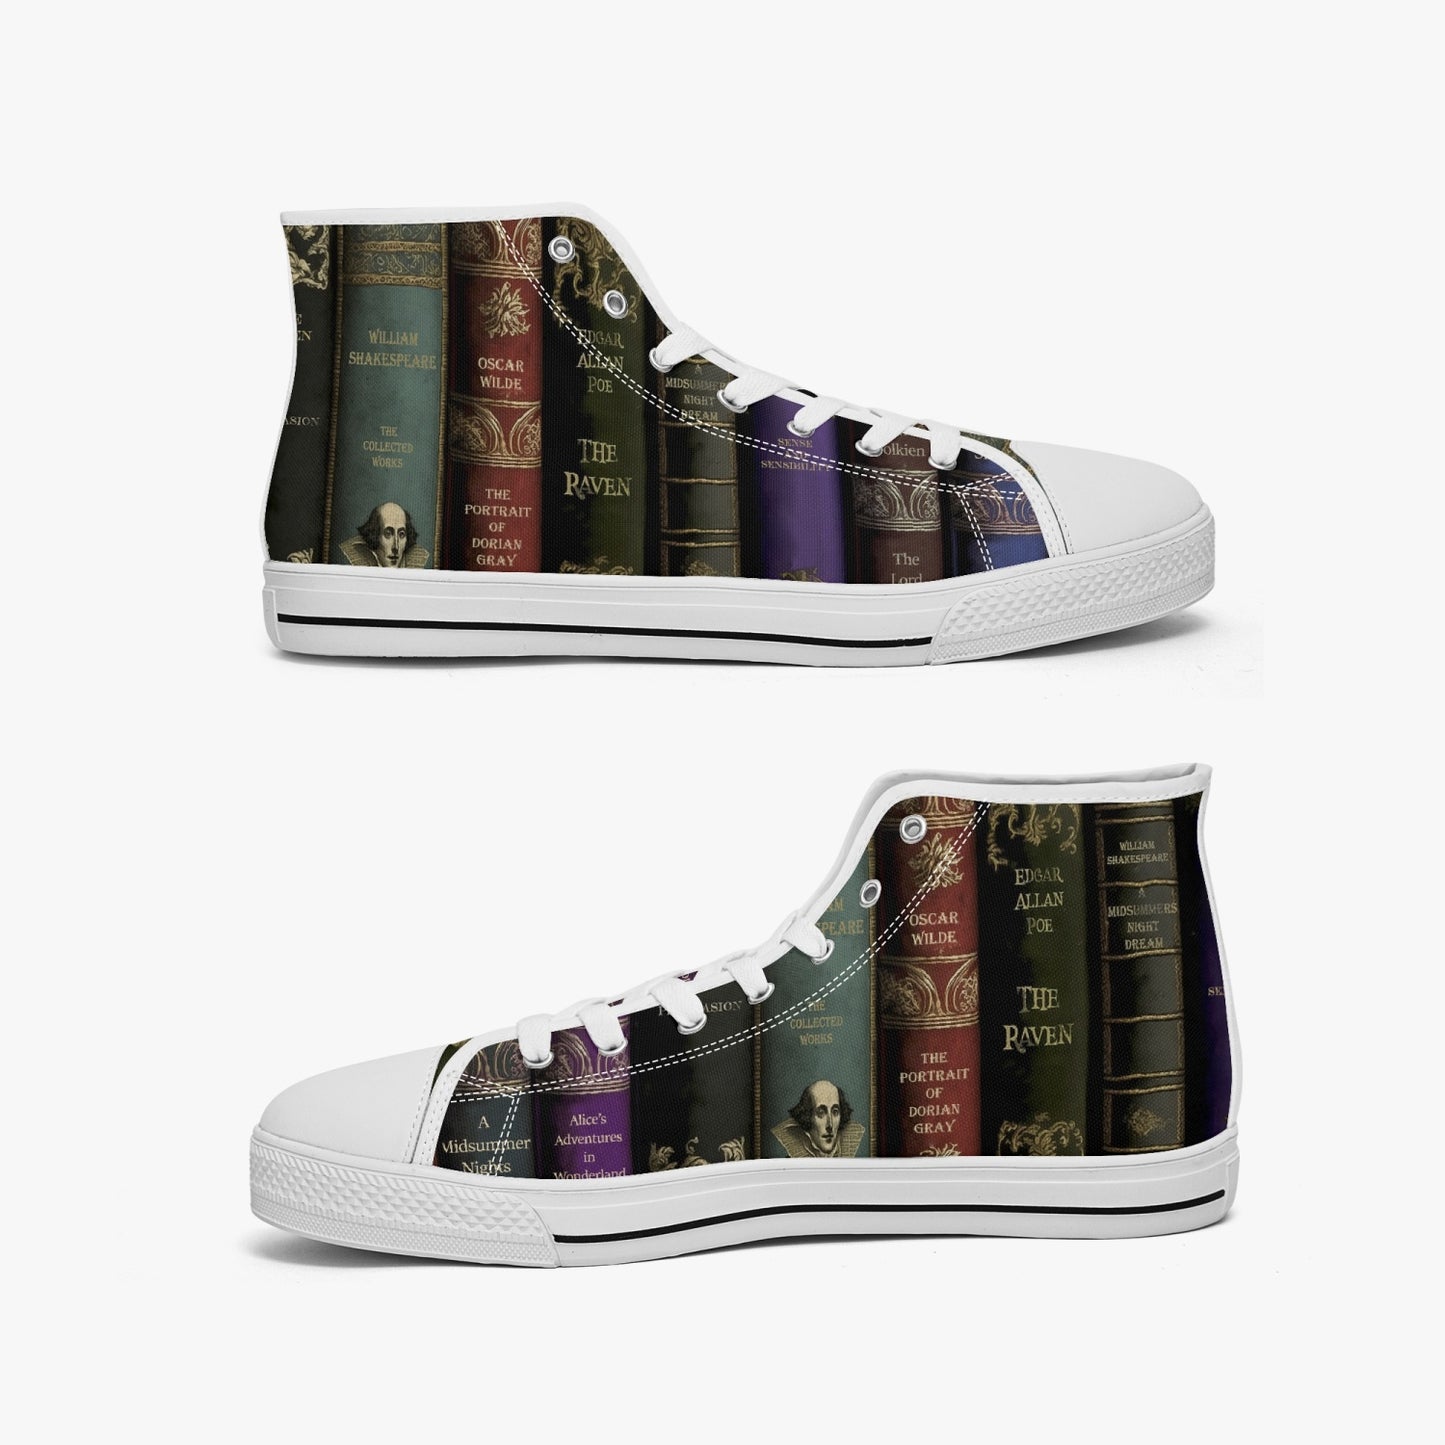 Vintage Library Books Hi Top Sneakers - Librarian Shoes - Dark Academia High Tops (JP4002)